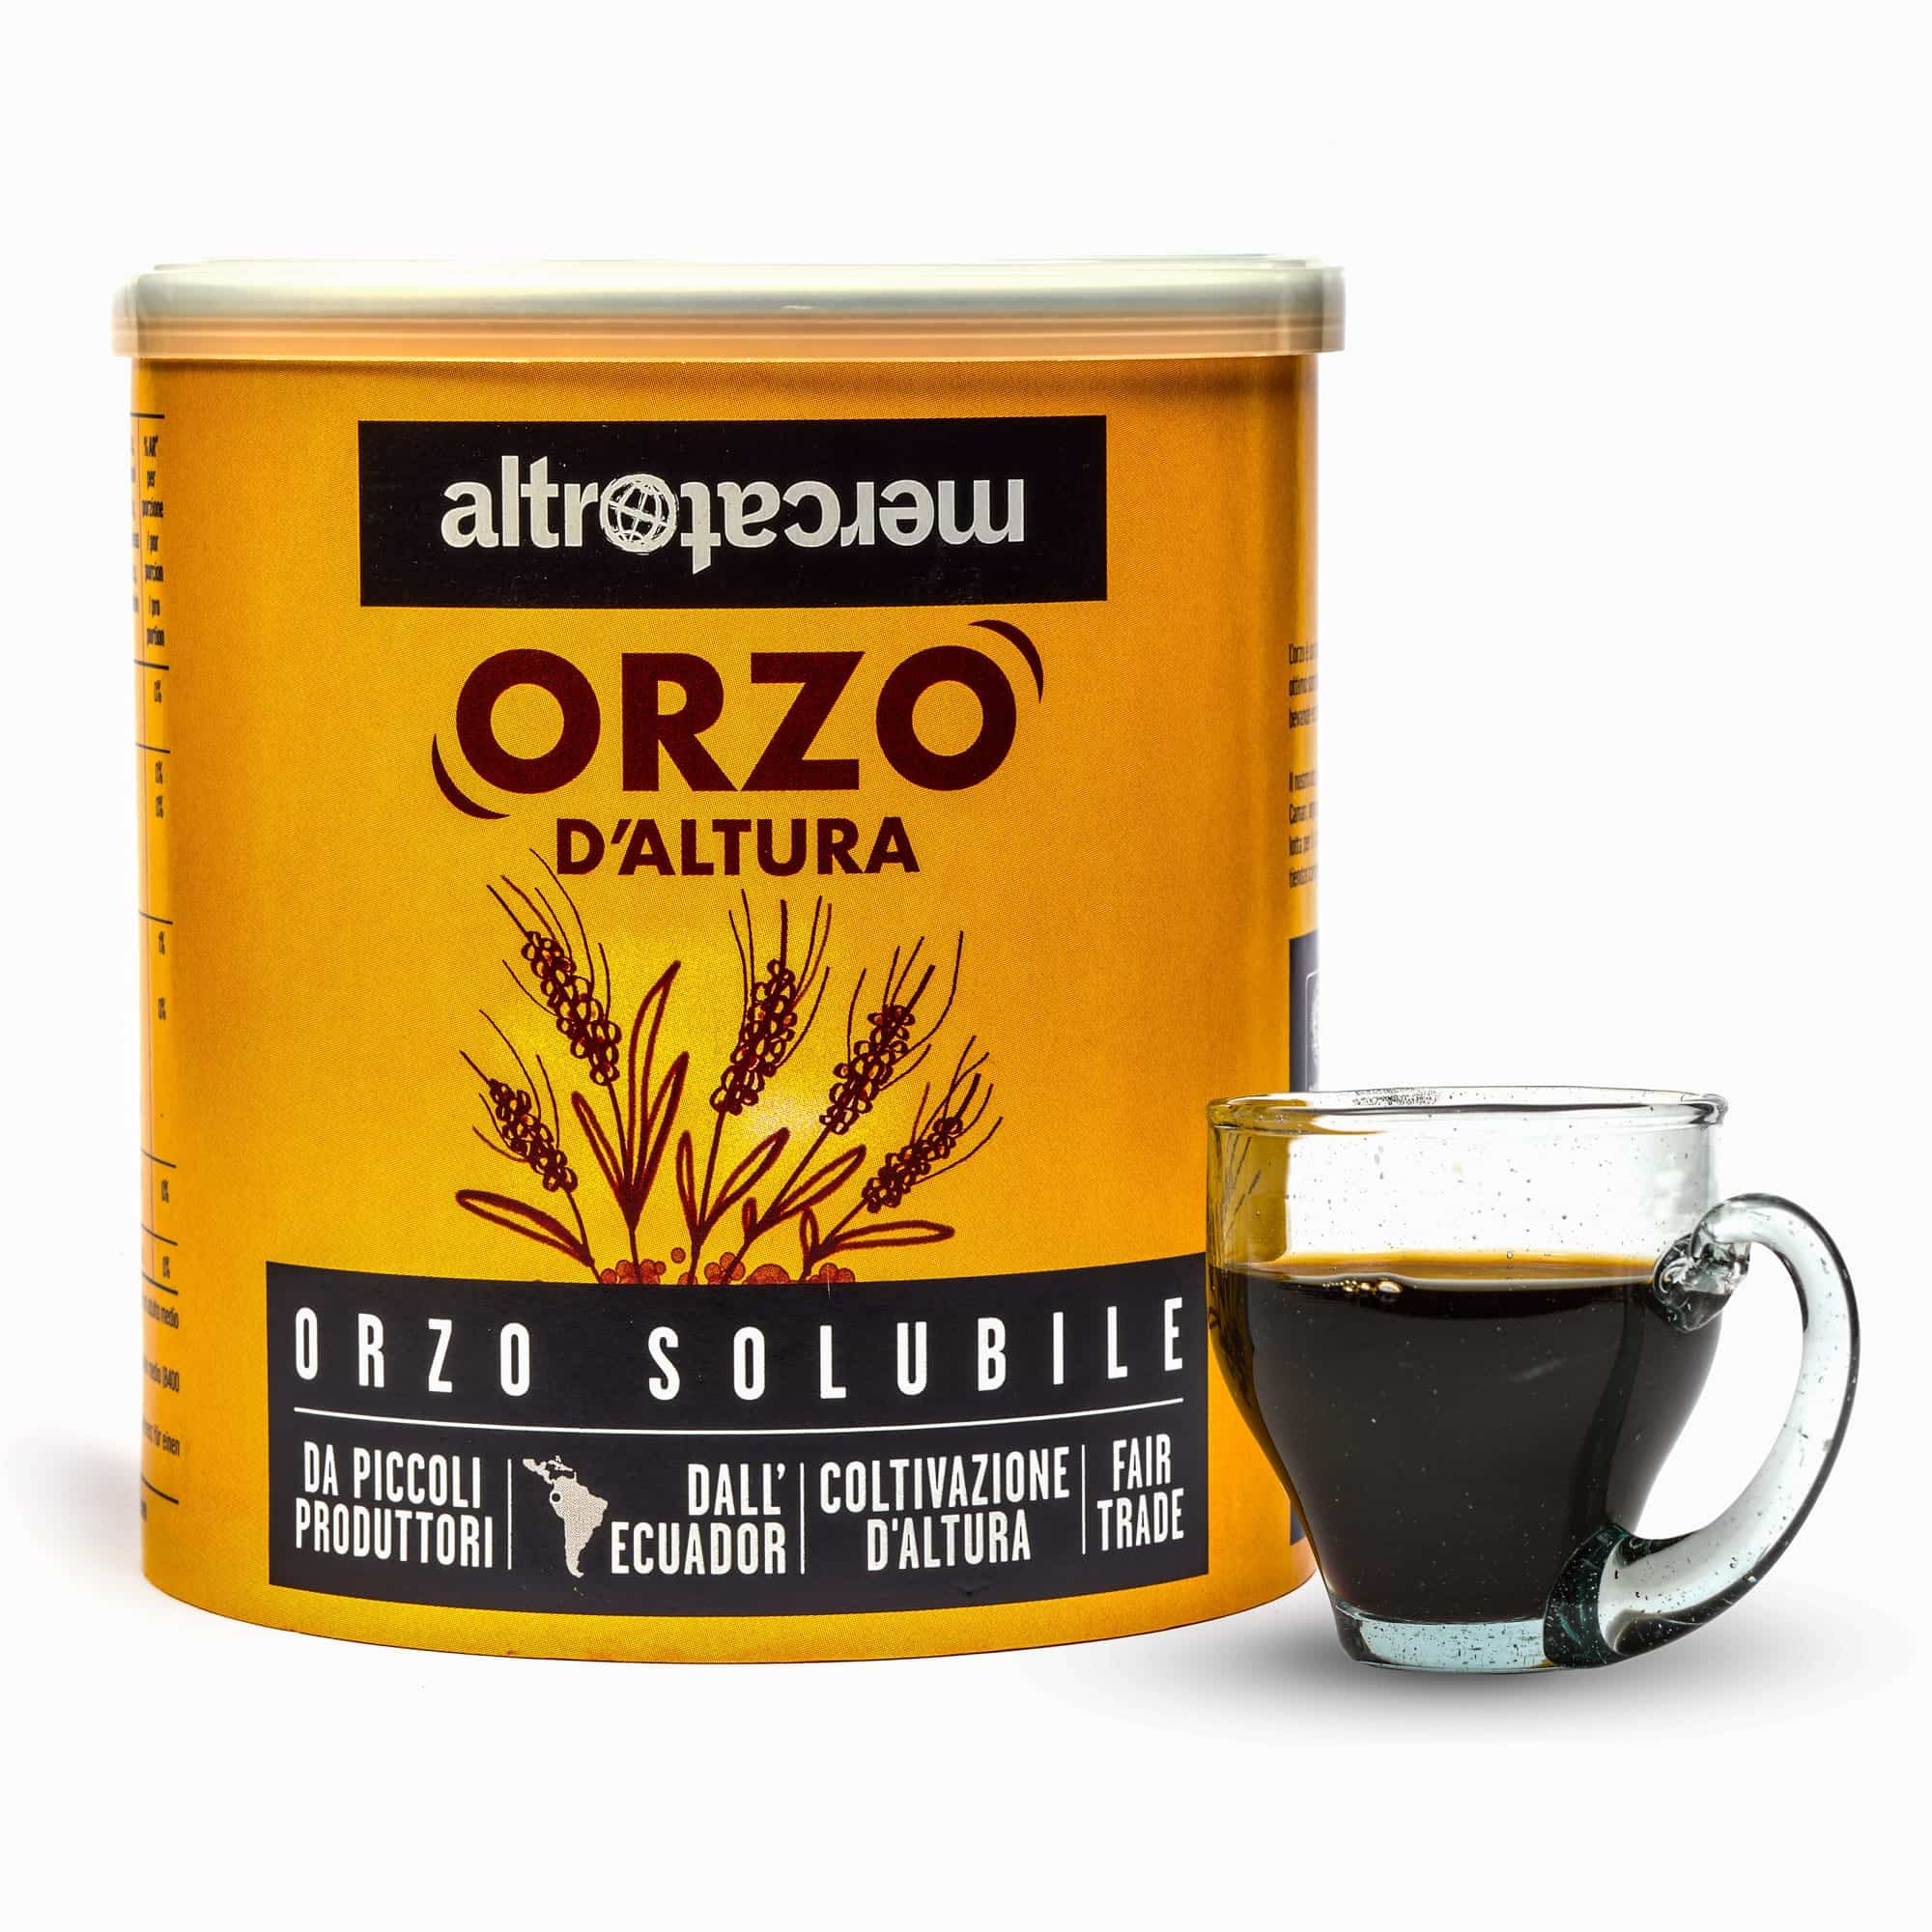 Orzo d'altura solubile - 120g